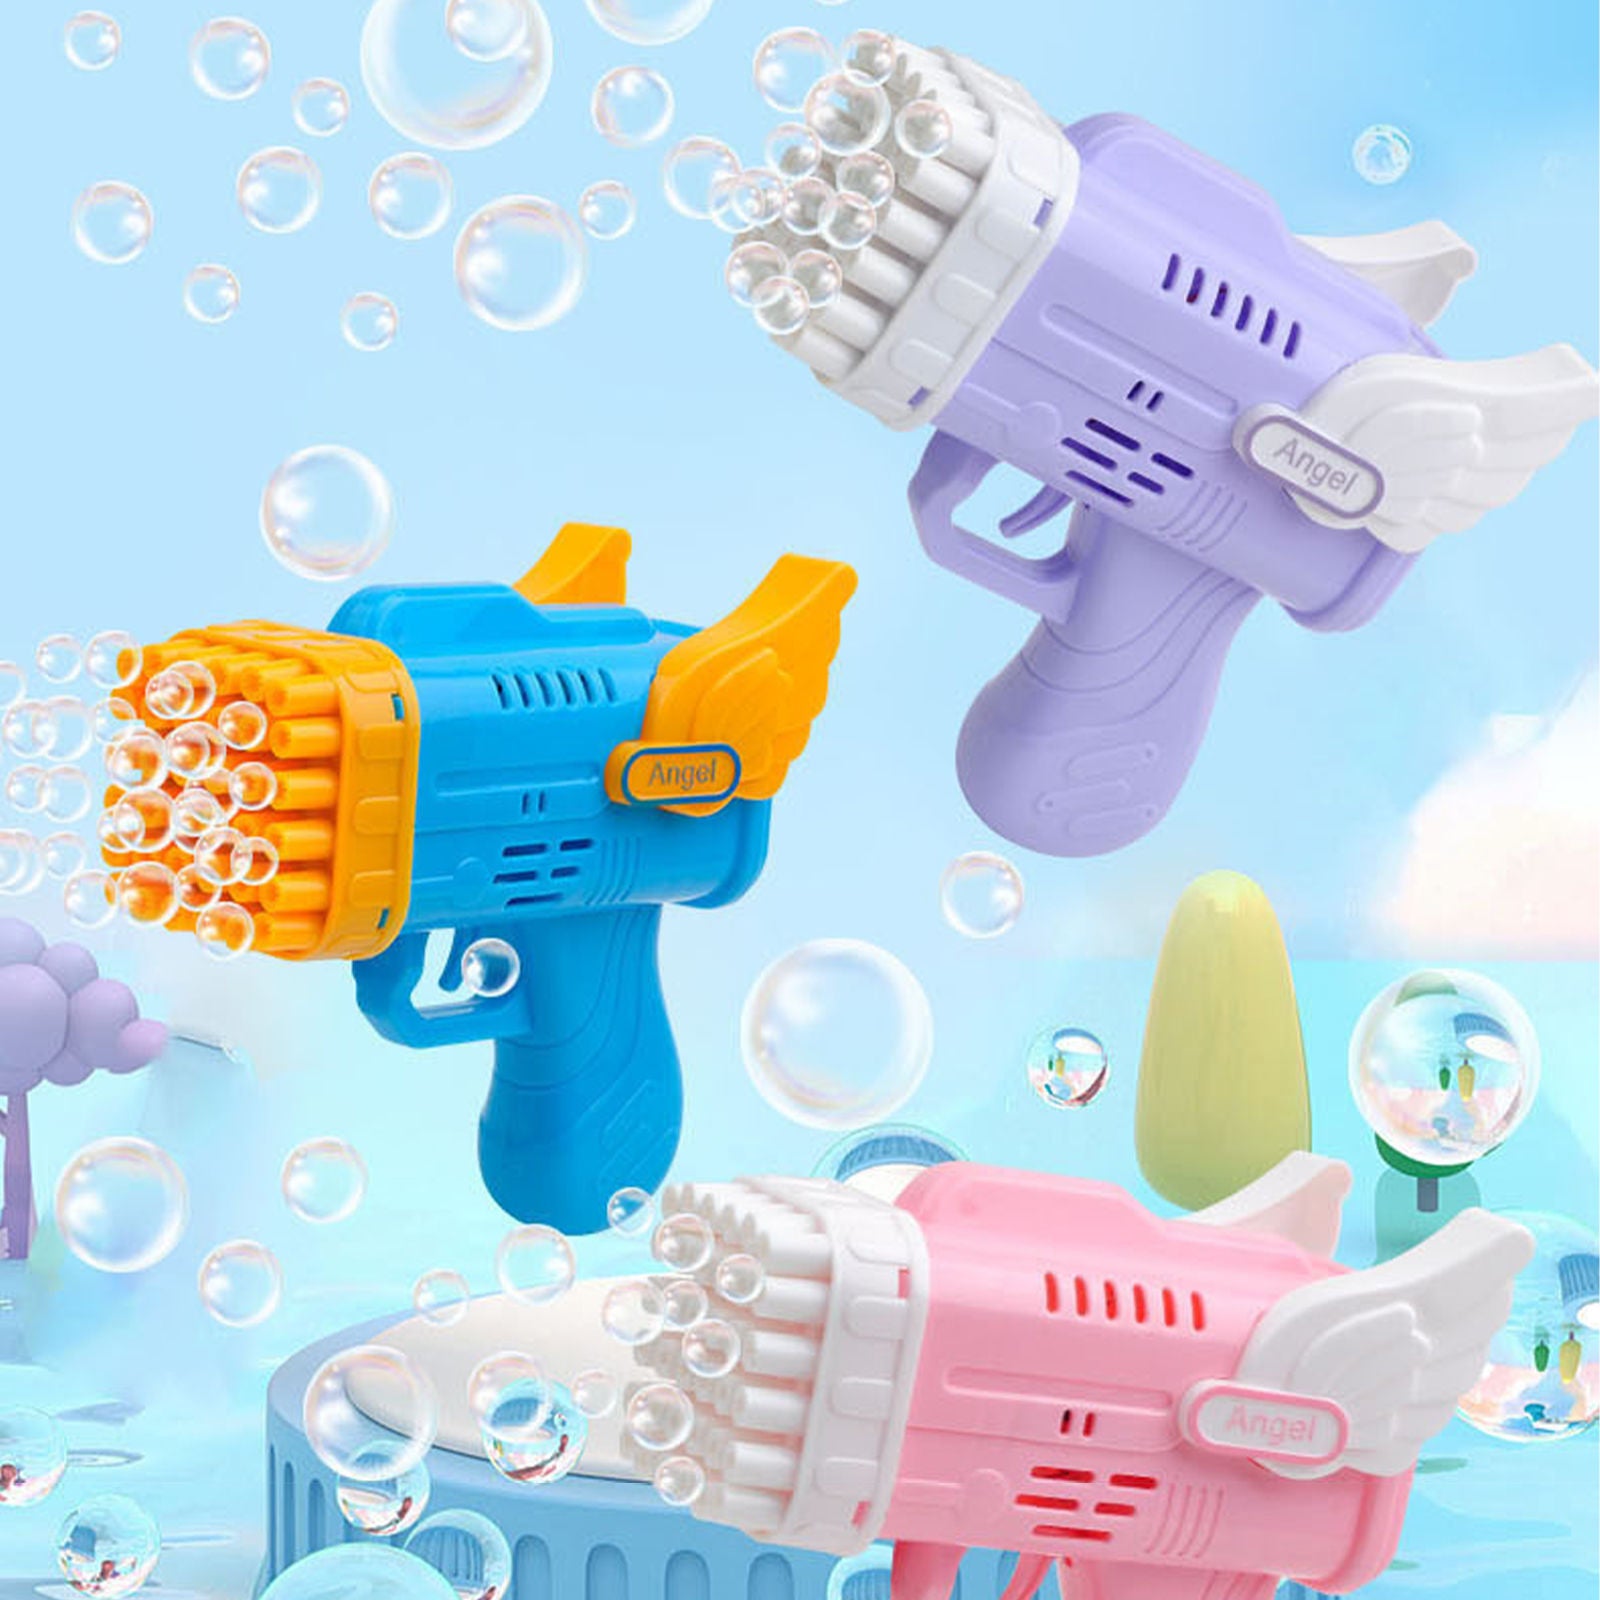 42 Hole Angel Wing Automatic Bubble Blowing Bubble Gun Launcher Toy Yellow